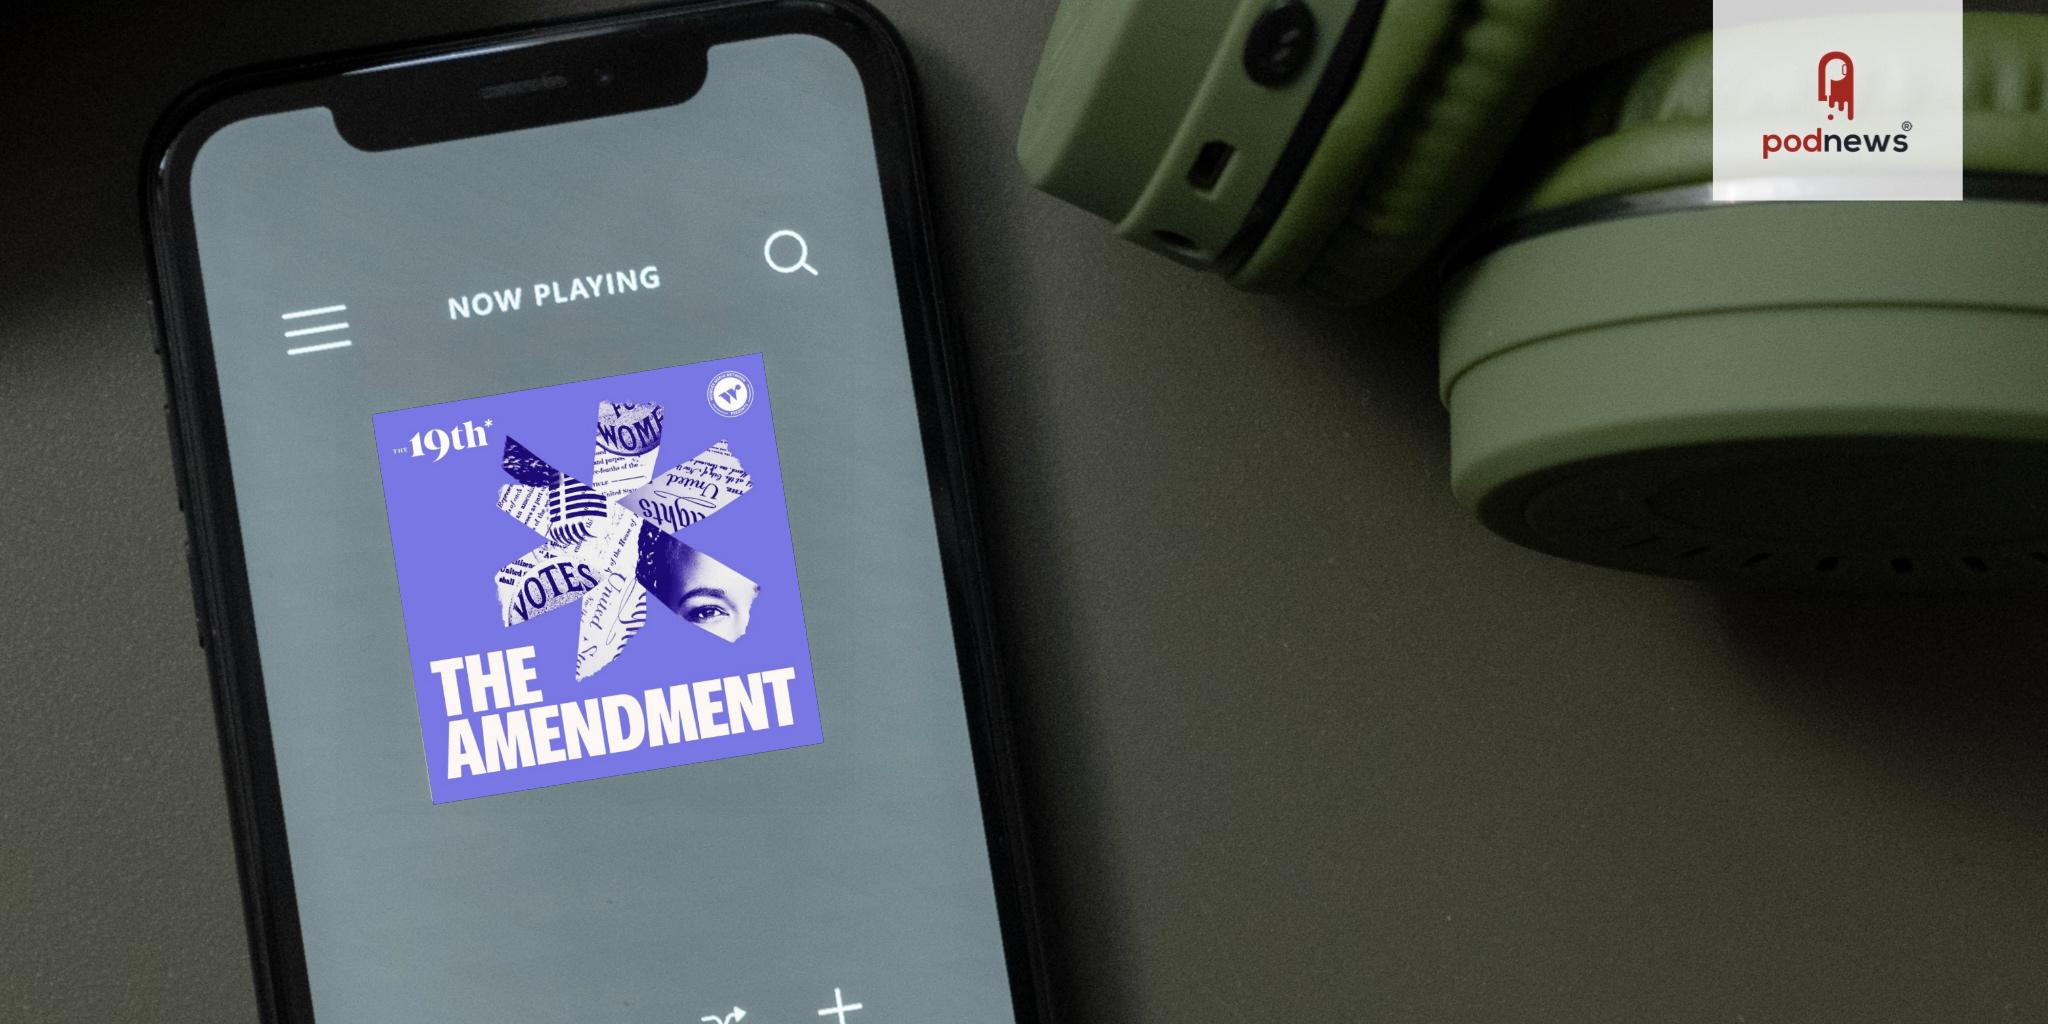 The 19th News and Wonder Media Network launch new podcast, The Amendment